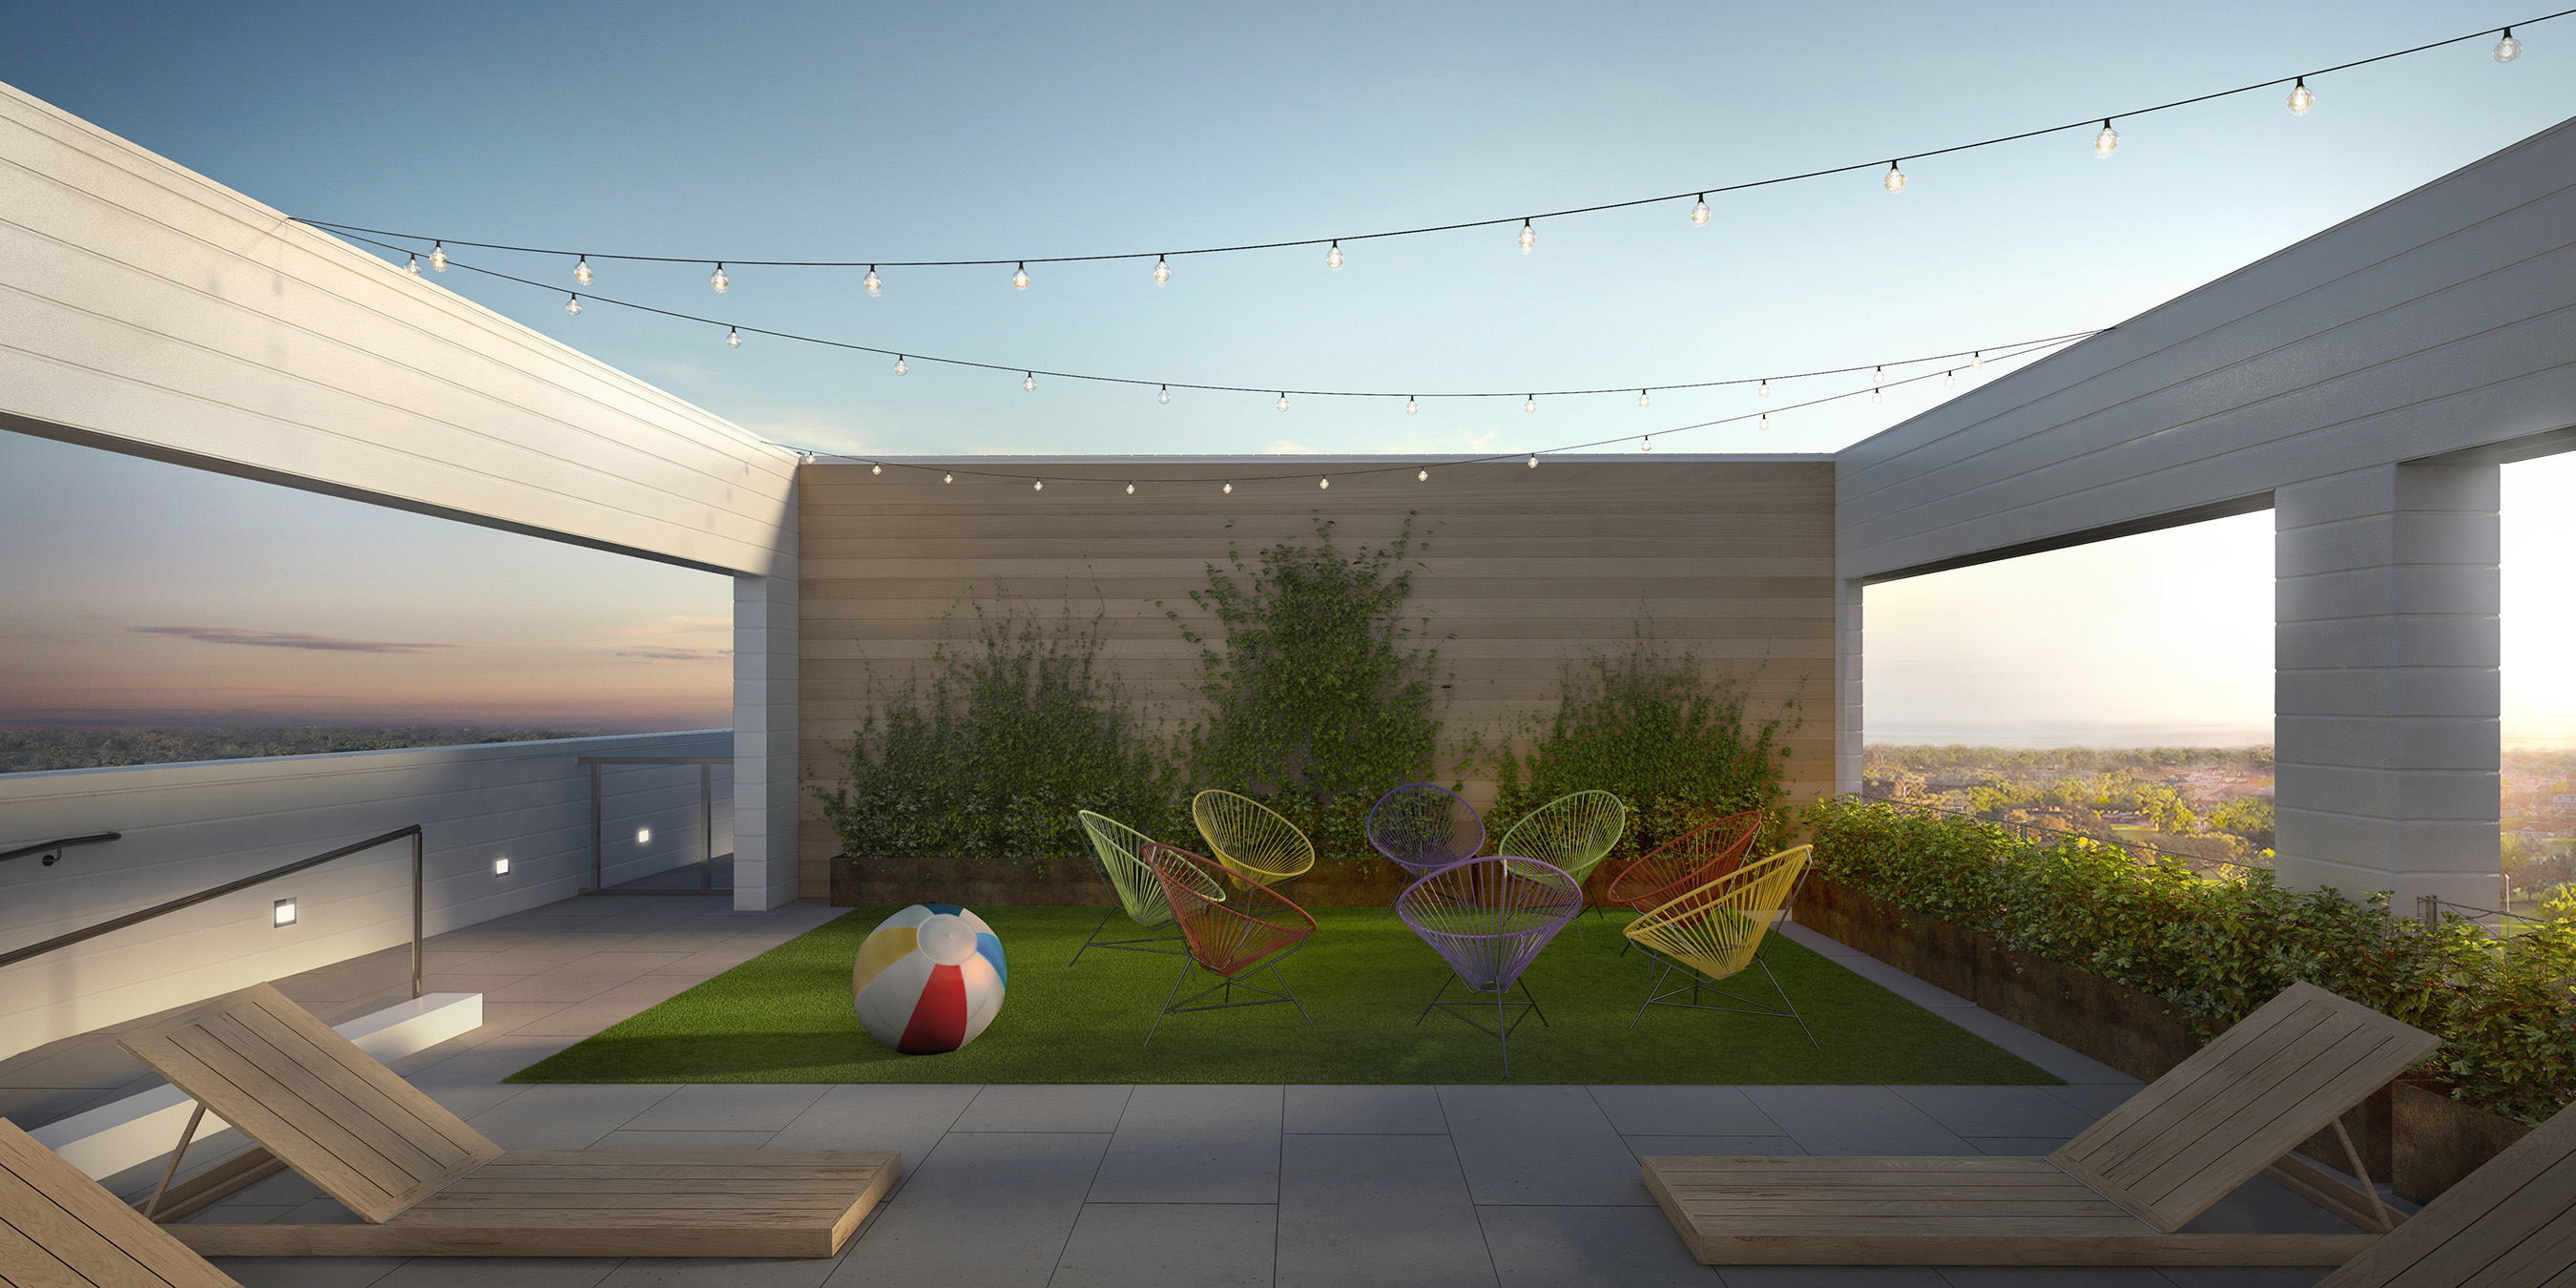 The roof deck, with sweeping views of Asbury Park, provides residents with a place to relax and mingle.